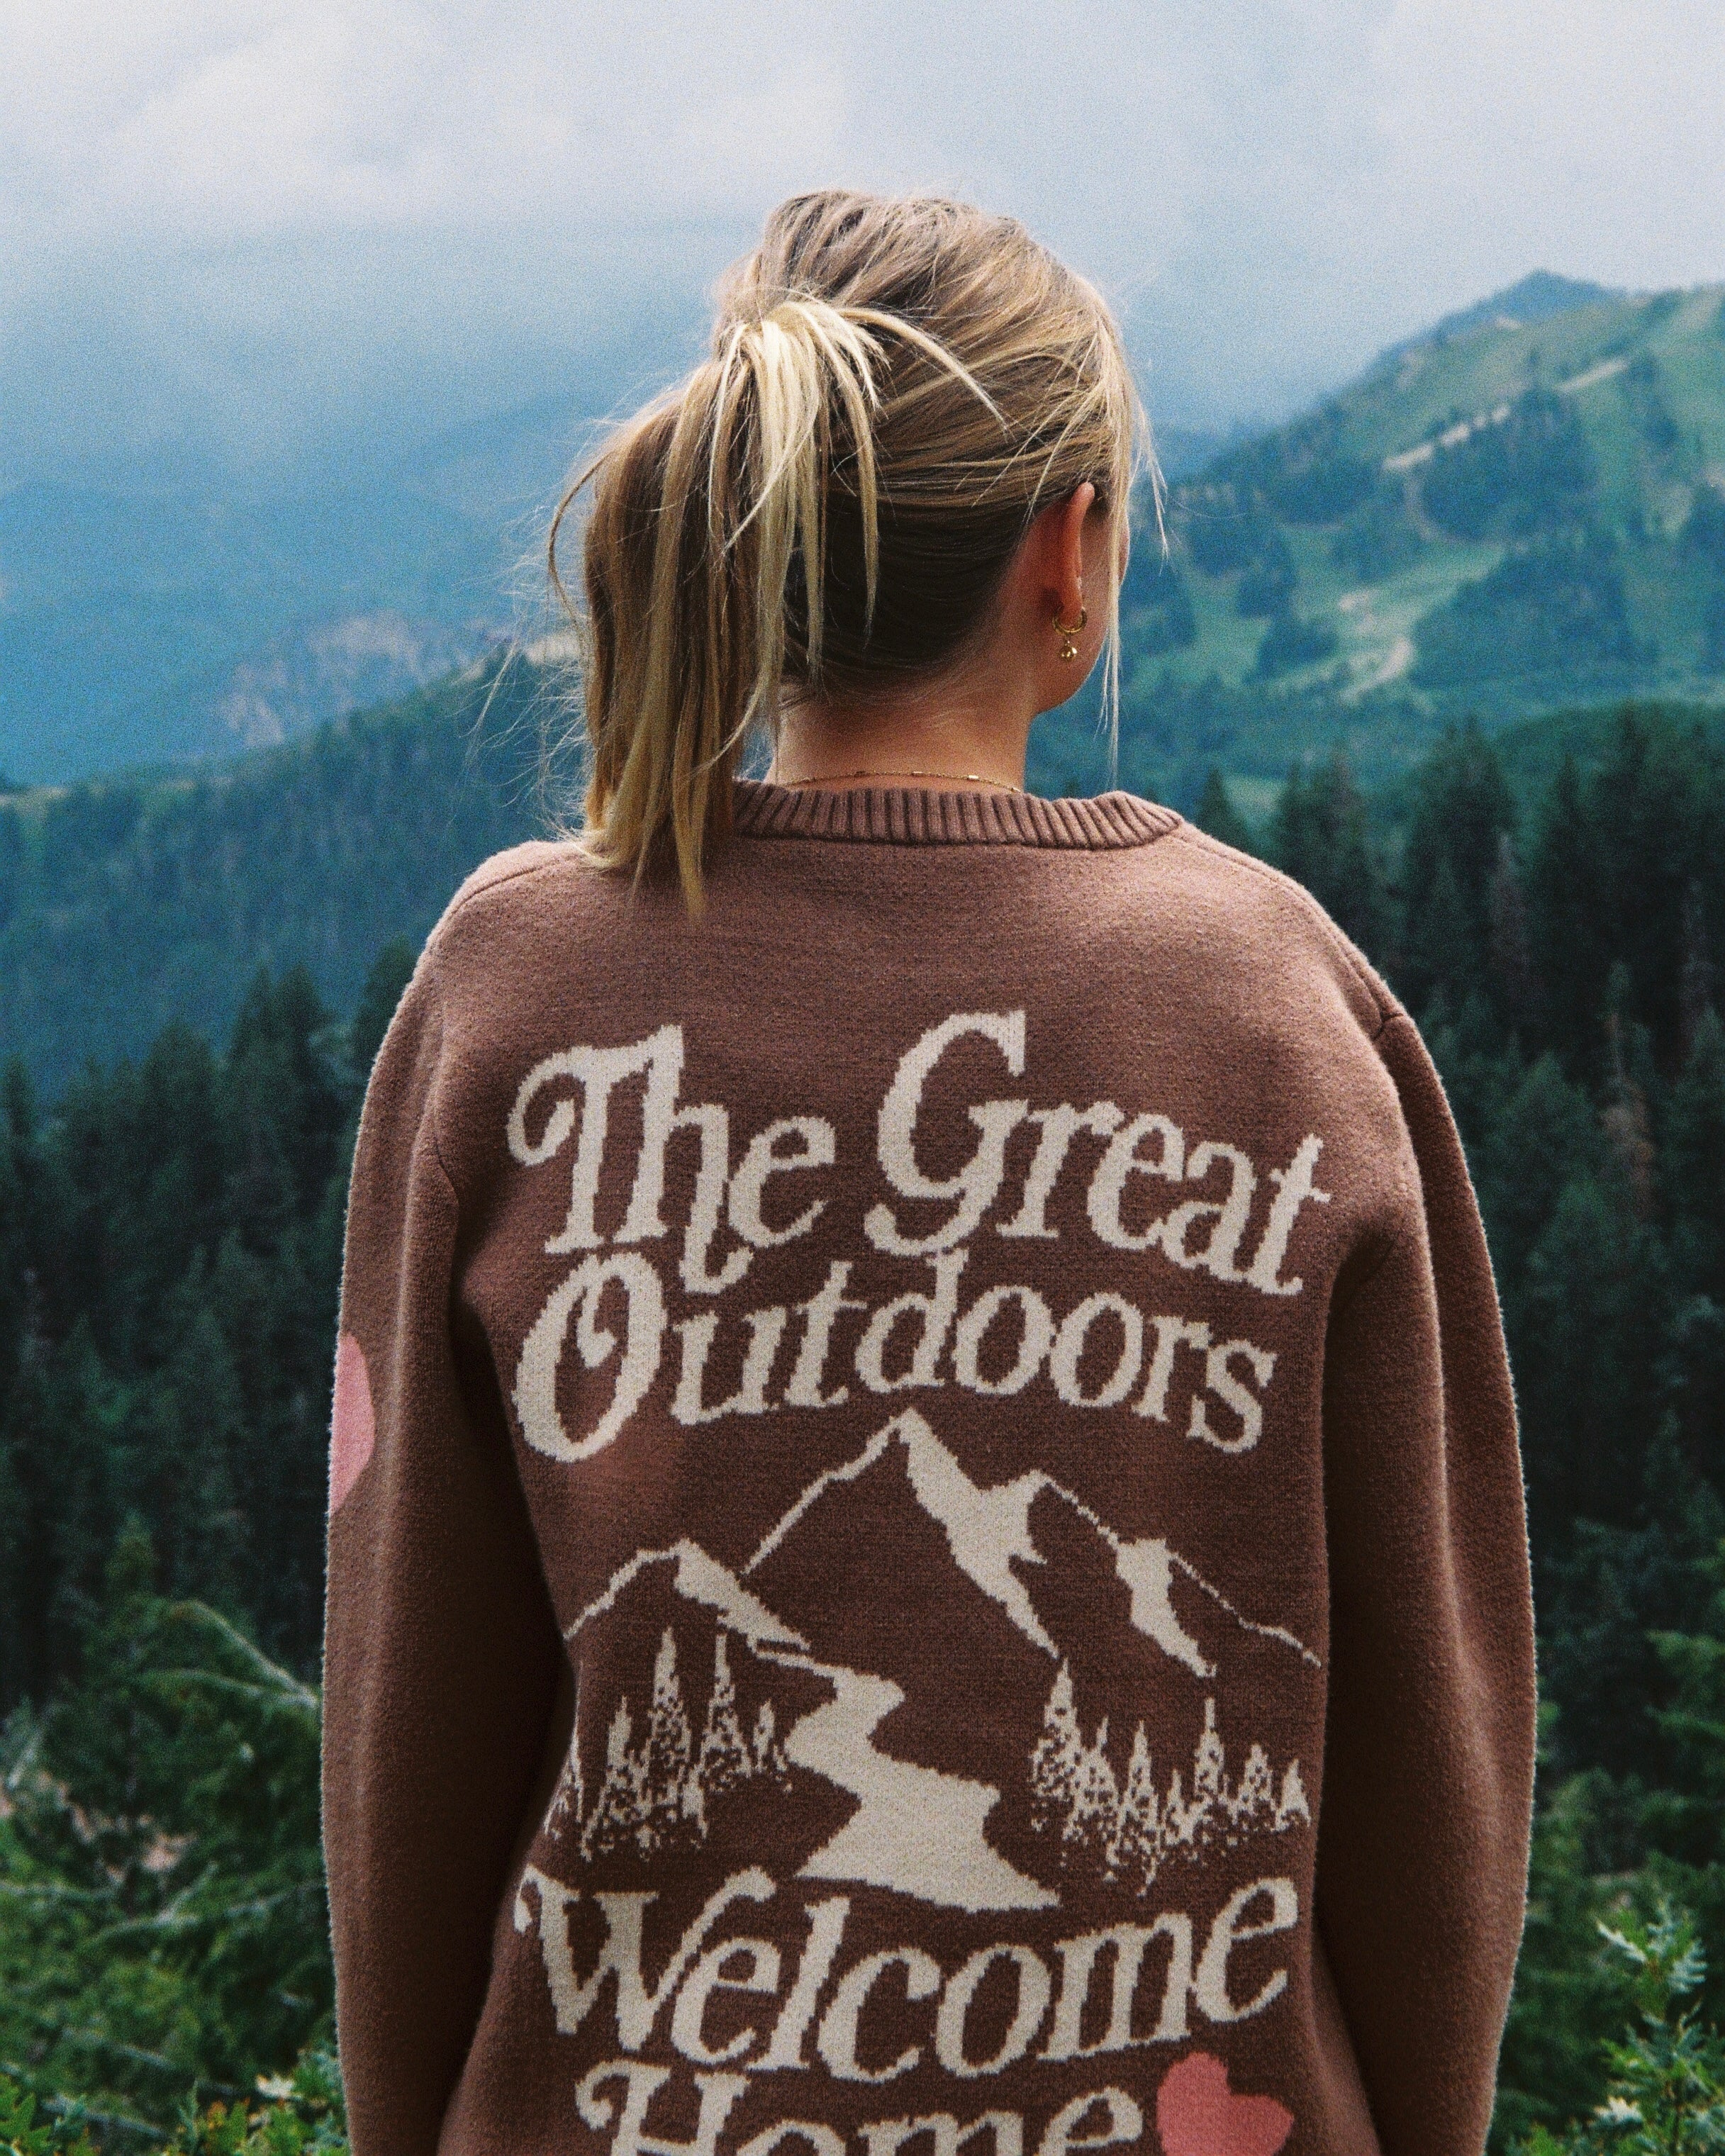 "The Great Outdoors" Knit Sweater in Brown